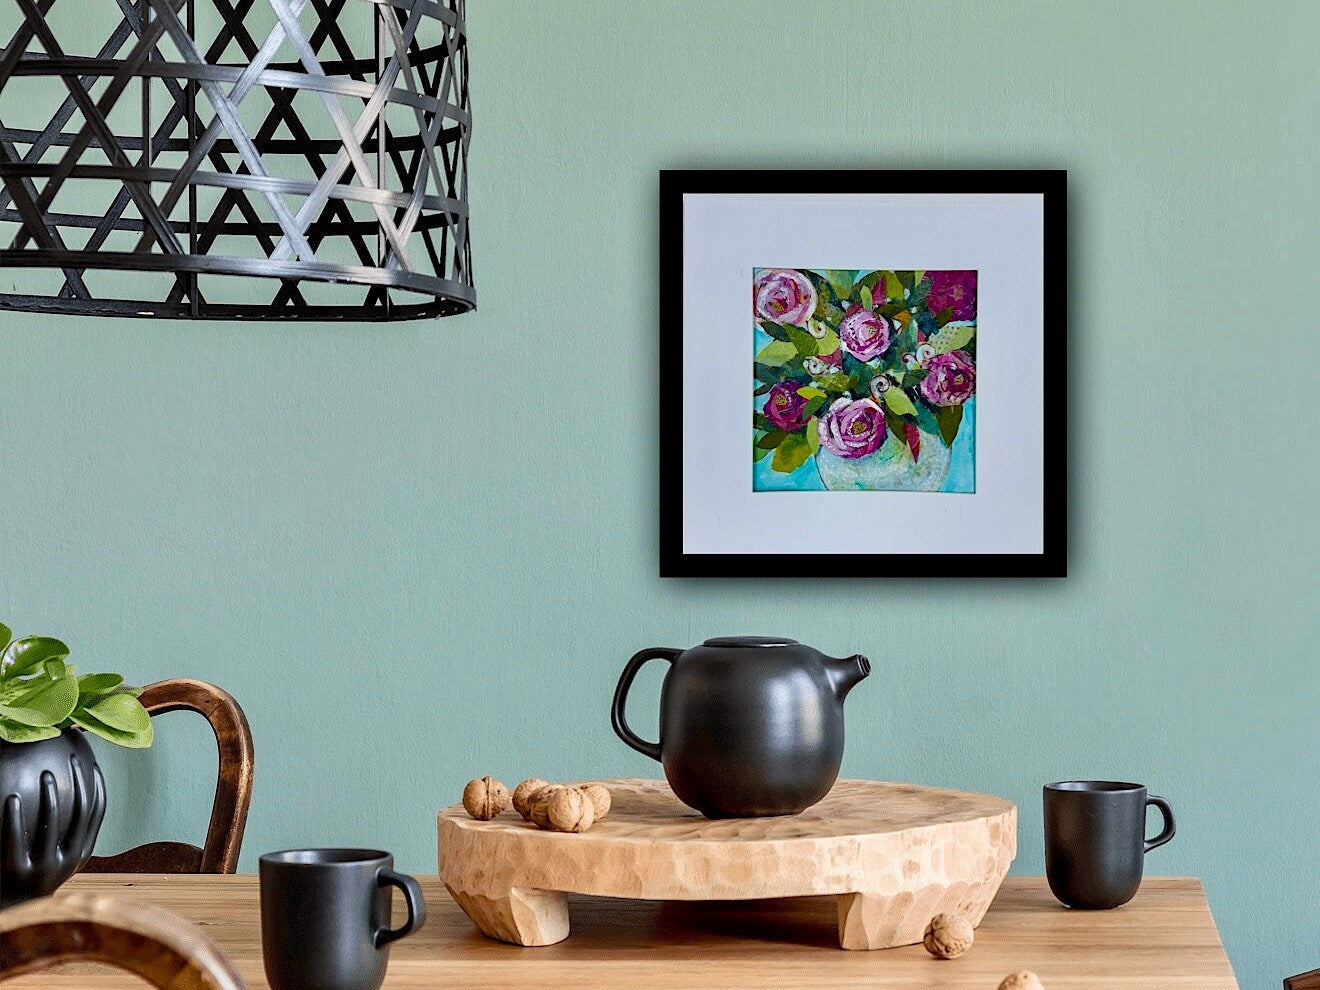 Eve's Delight Floral Painting Collage flower bouquet Delicate painting Eye catching color Botanical design Nature home accent Feminine decor